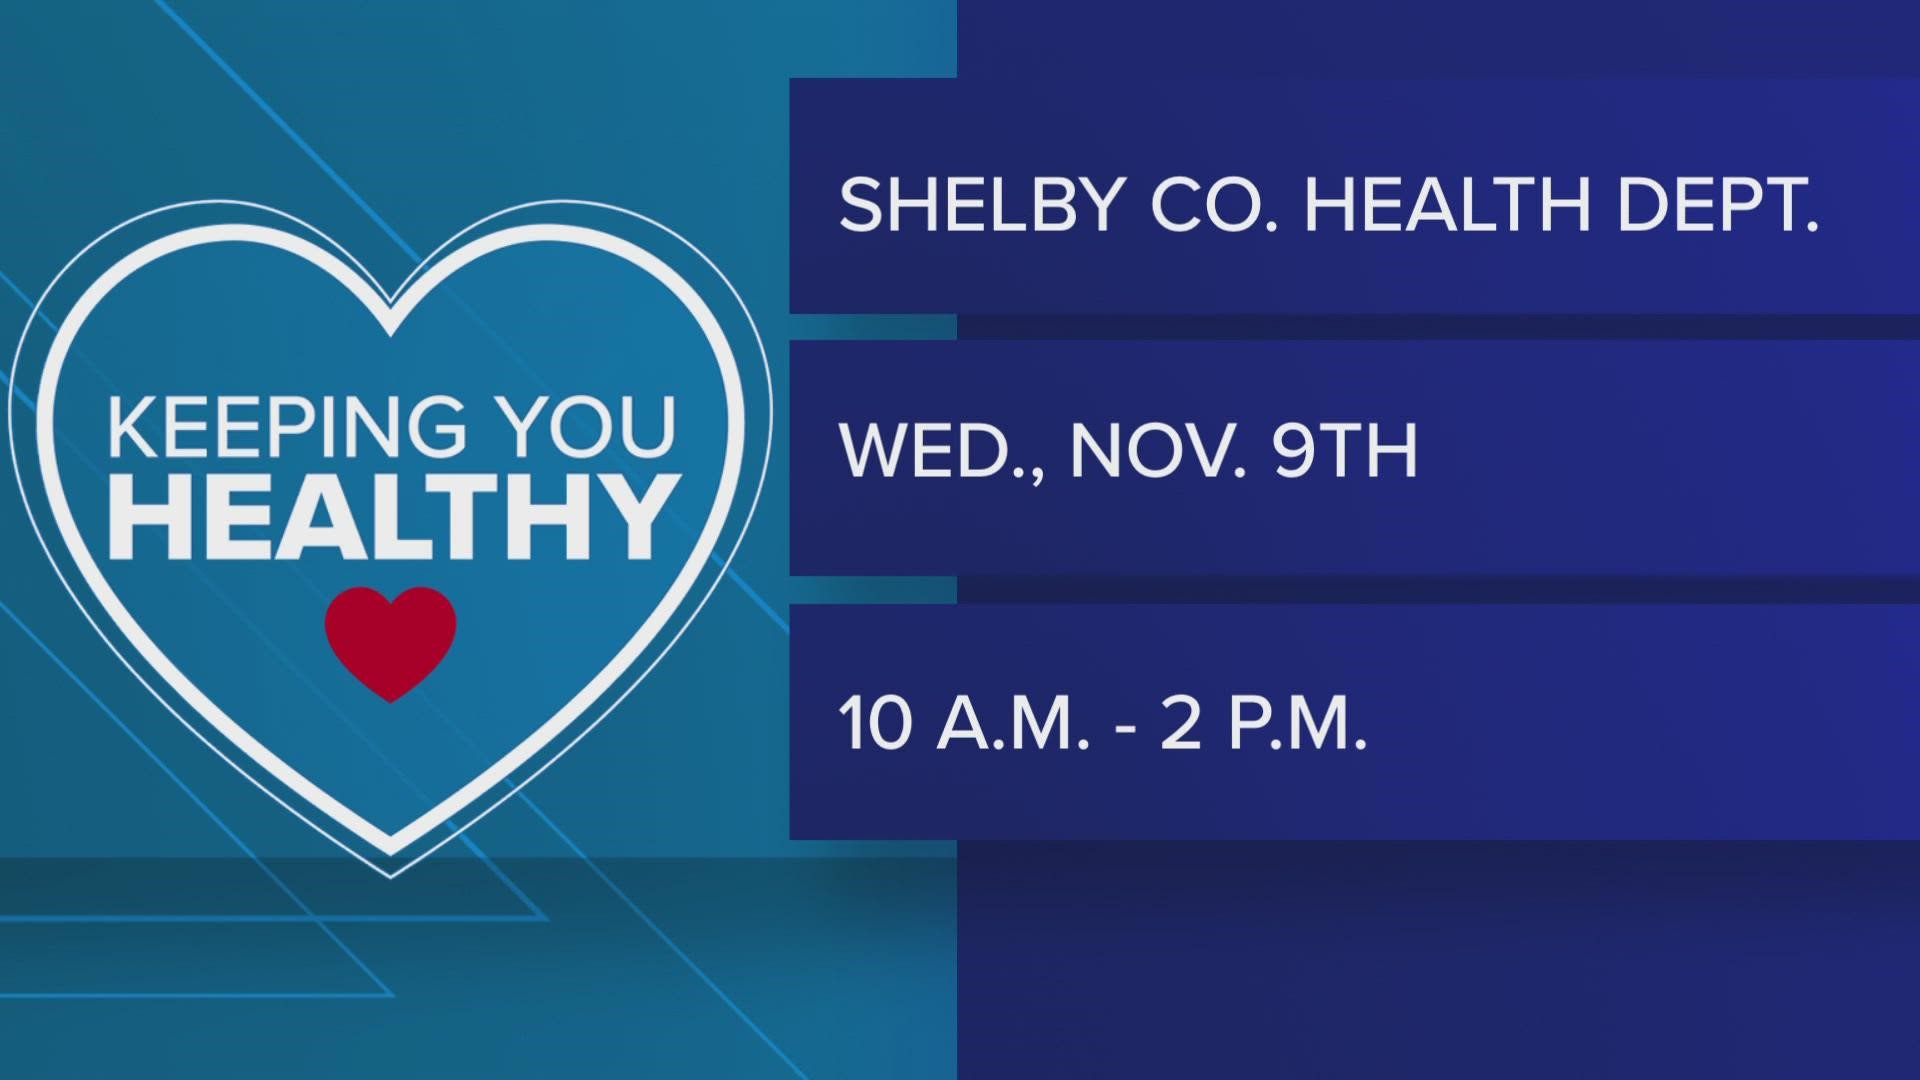 The vaccine will be offered on a walk-in basis between 10 a.m. and 2 p.m. at all Shelby County Health Departments on November 9.